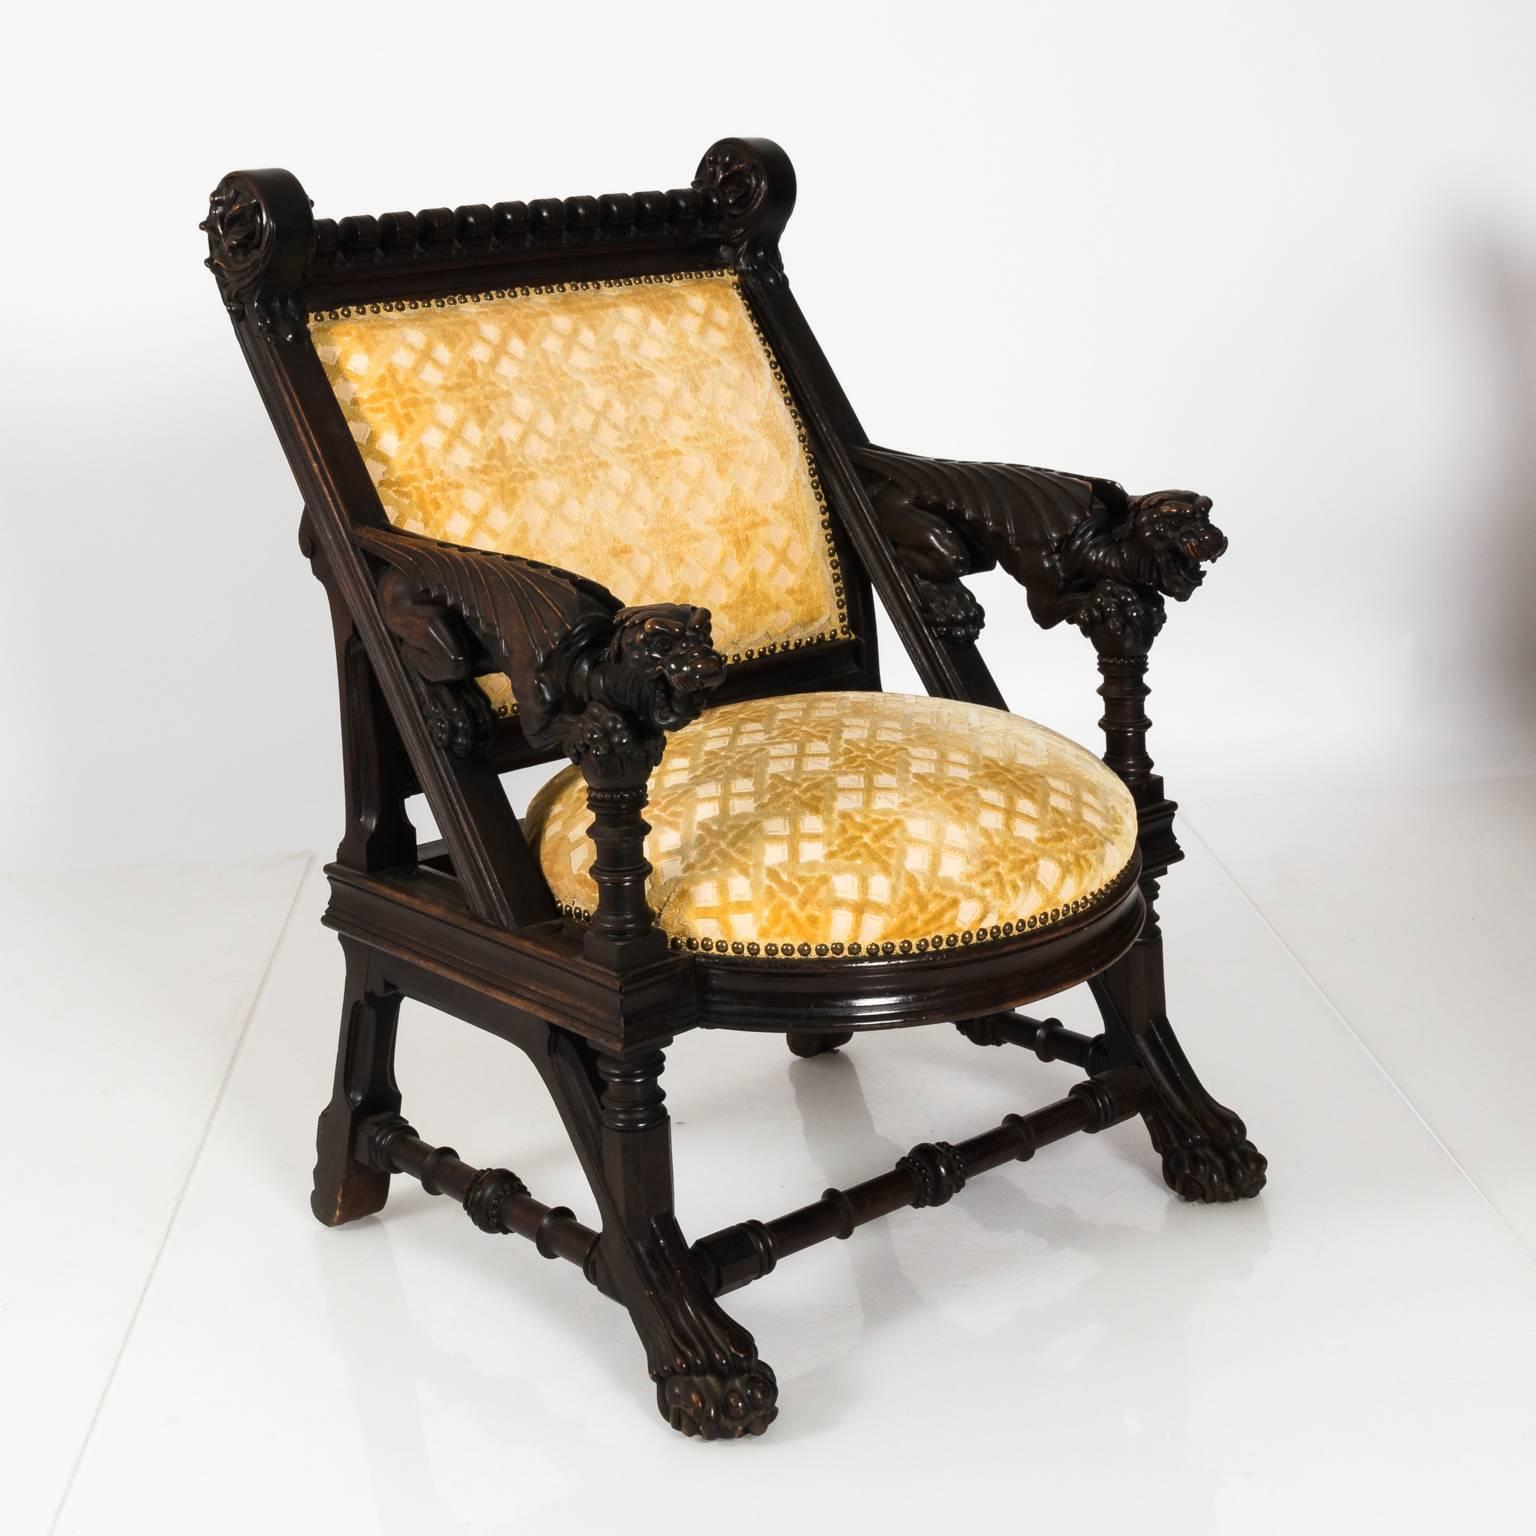 Pair of American Gothic Revival Armchairs by Daniel Pabst, circa 1878 For Sale 10